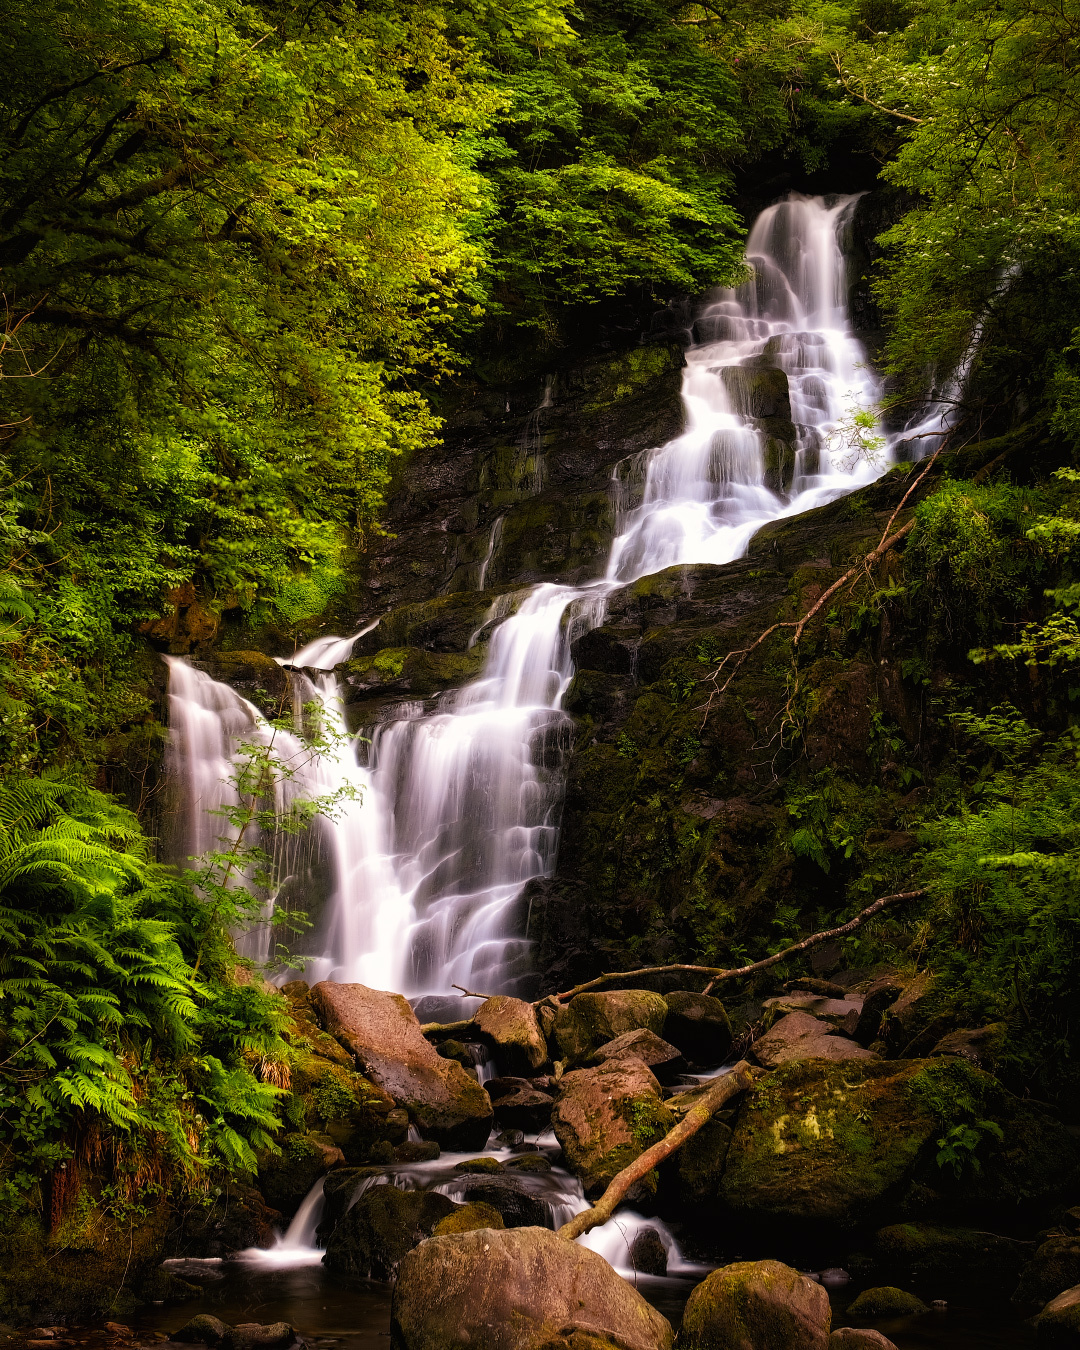 ...among the greens... ireland nature outdoors landscape long exposure water watrefall falling flow stream creek river rocks greens wood forest stones deep fairy tail mysterious scenic scenery picturesque awe wonderful breathtaking europe